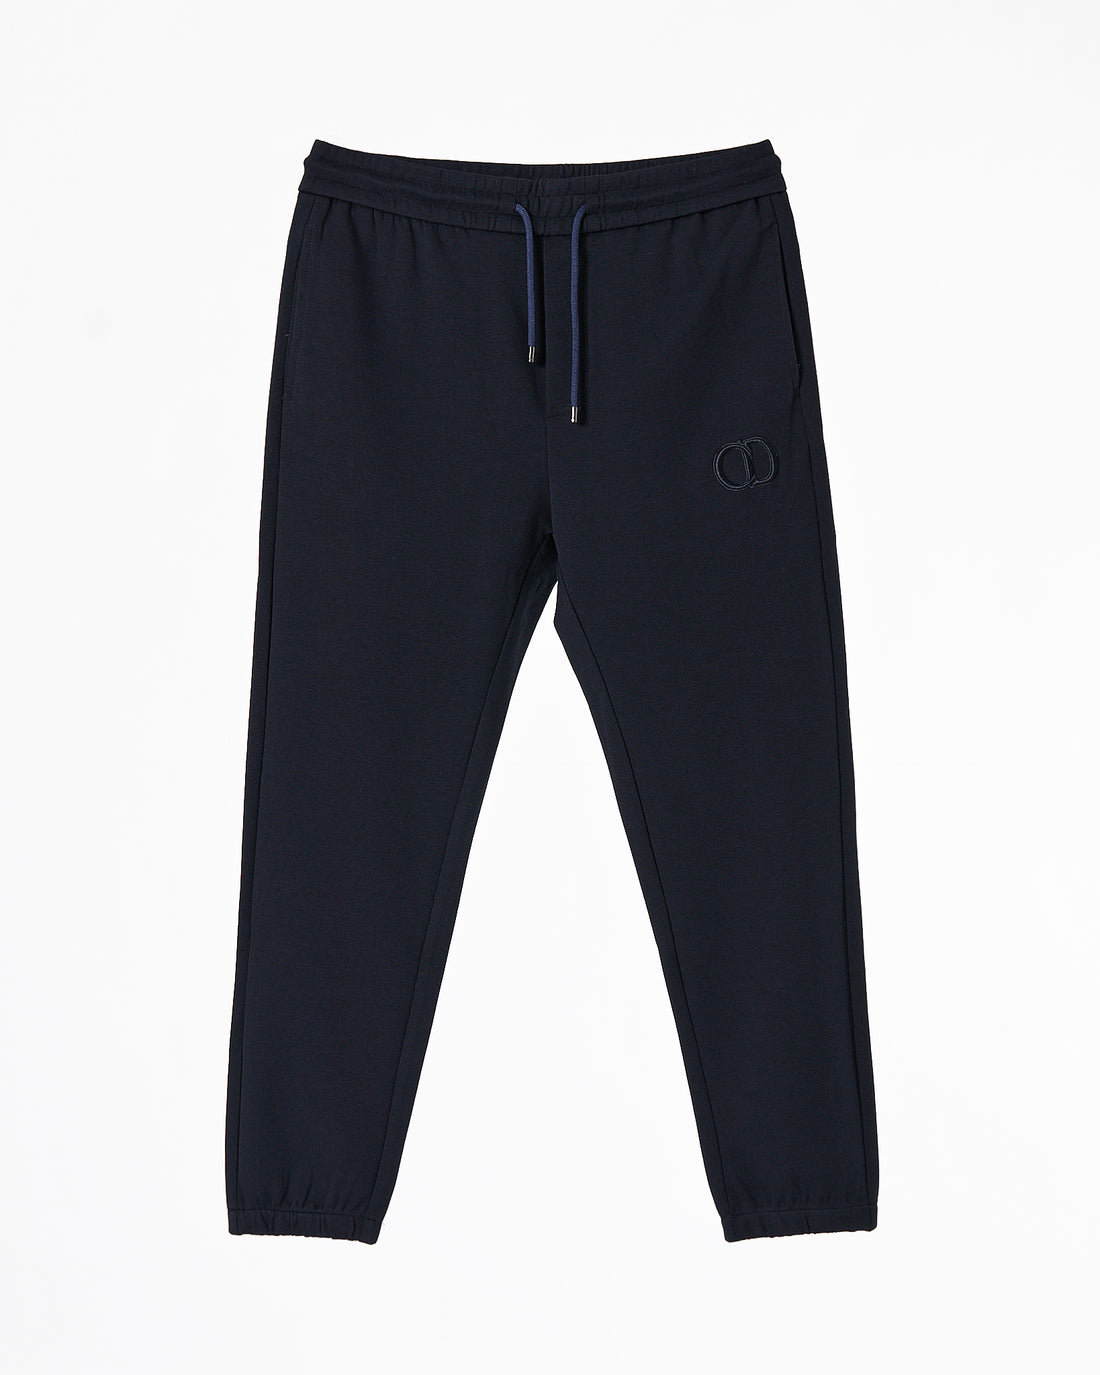 CD Logo Embroidered Men Blue Joggers 65.90